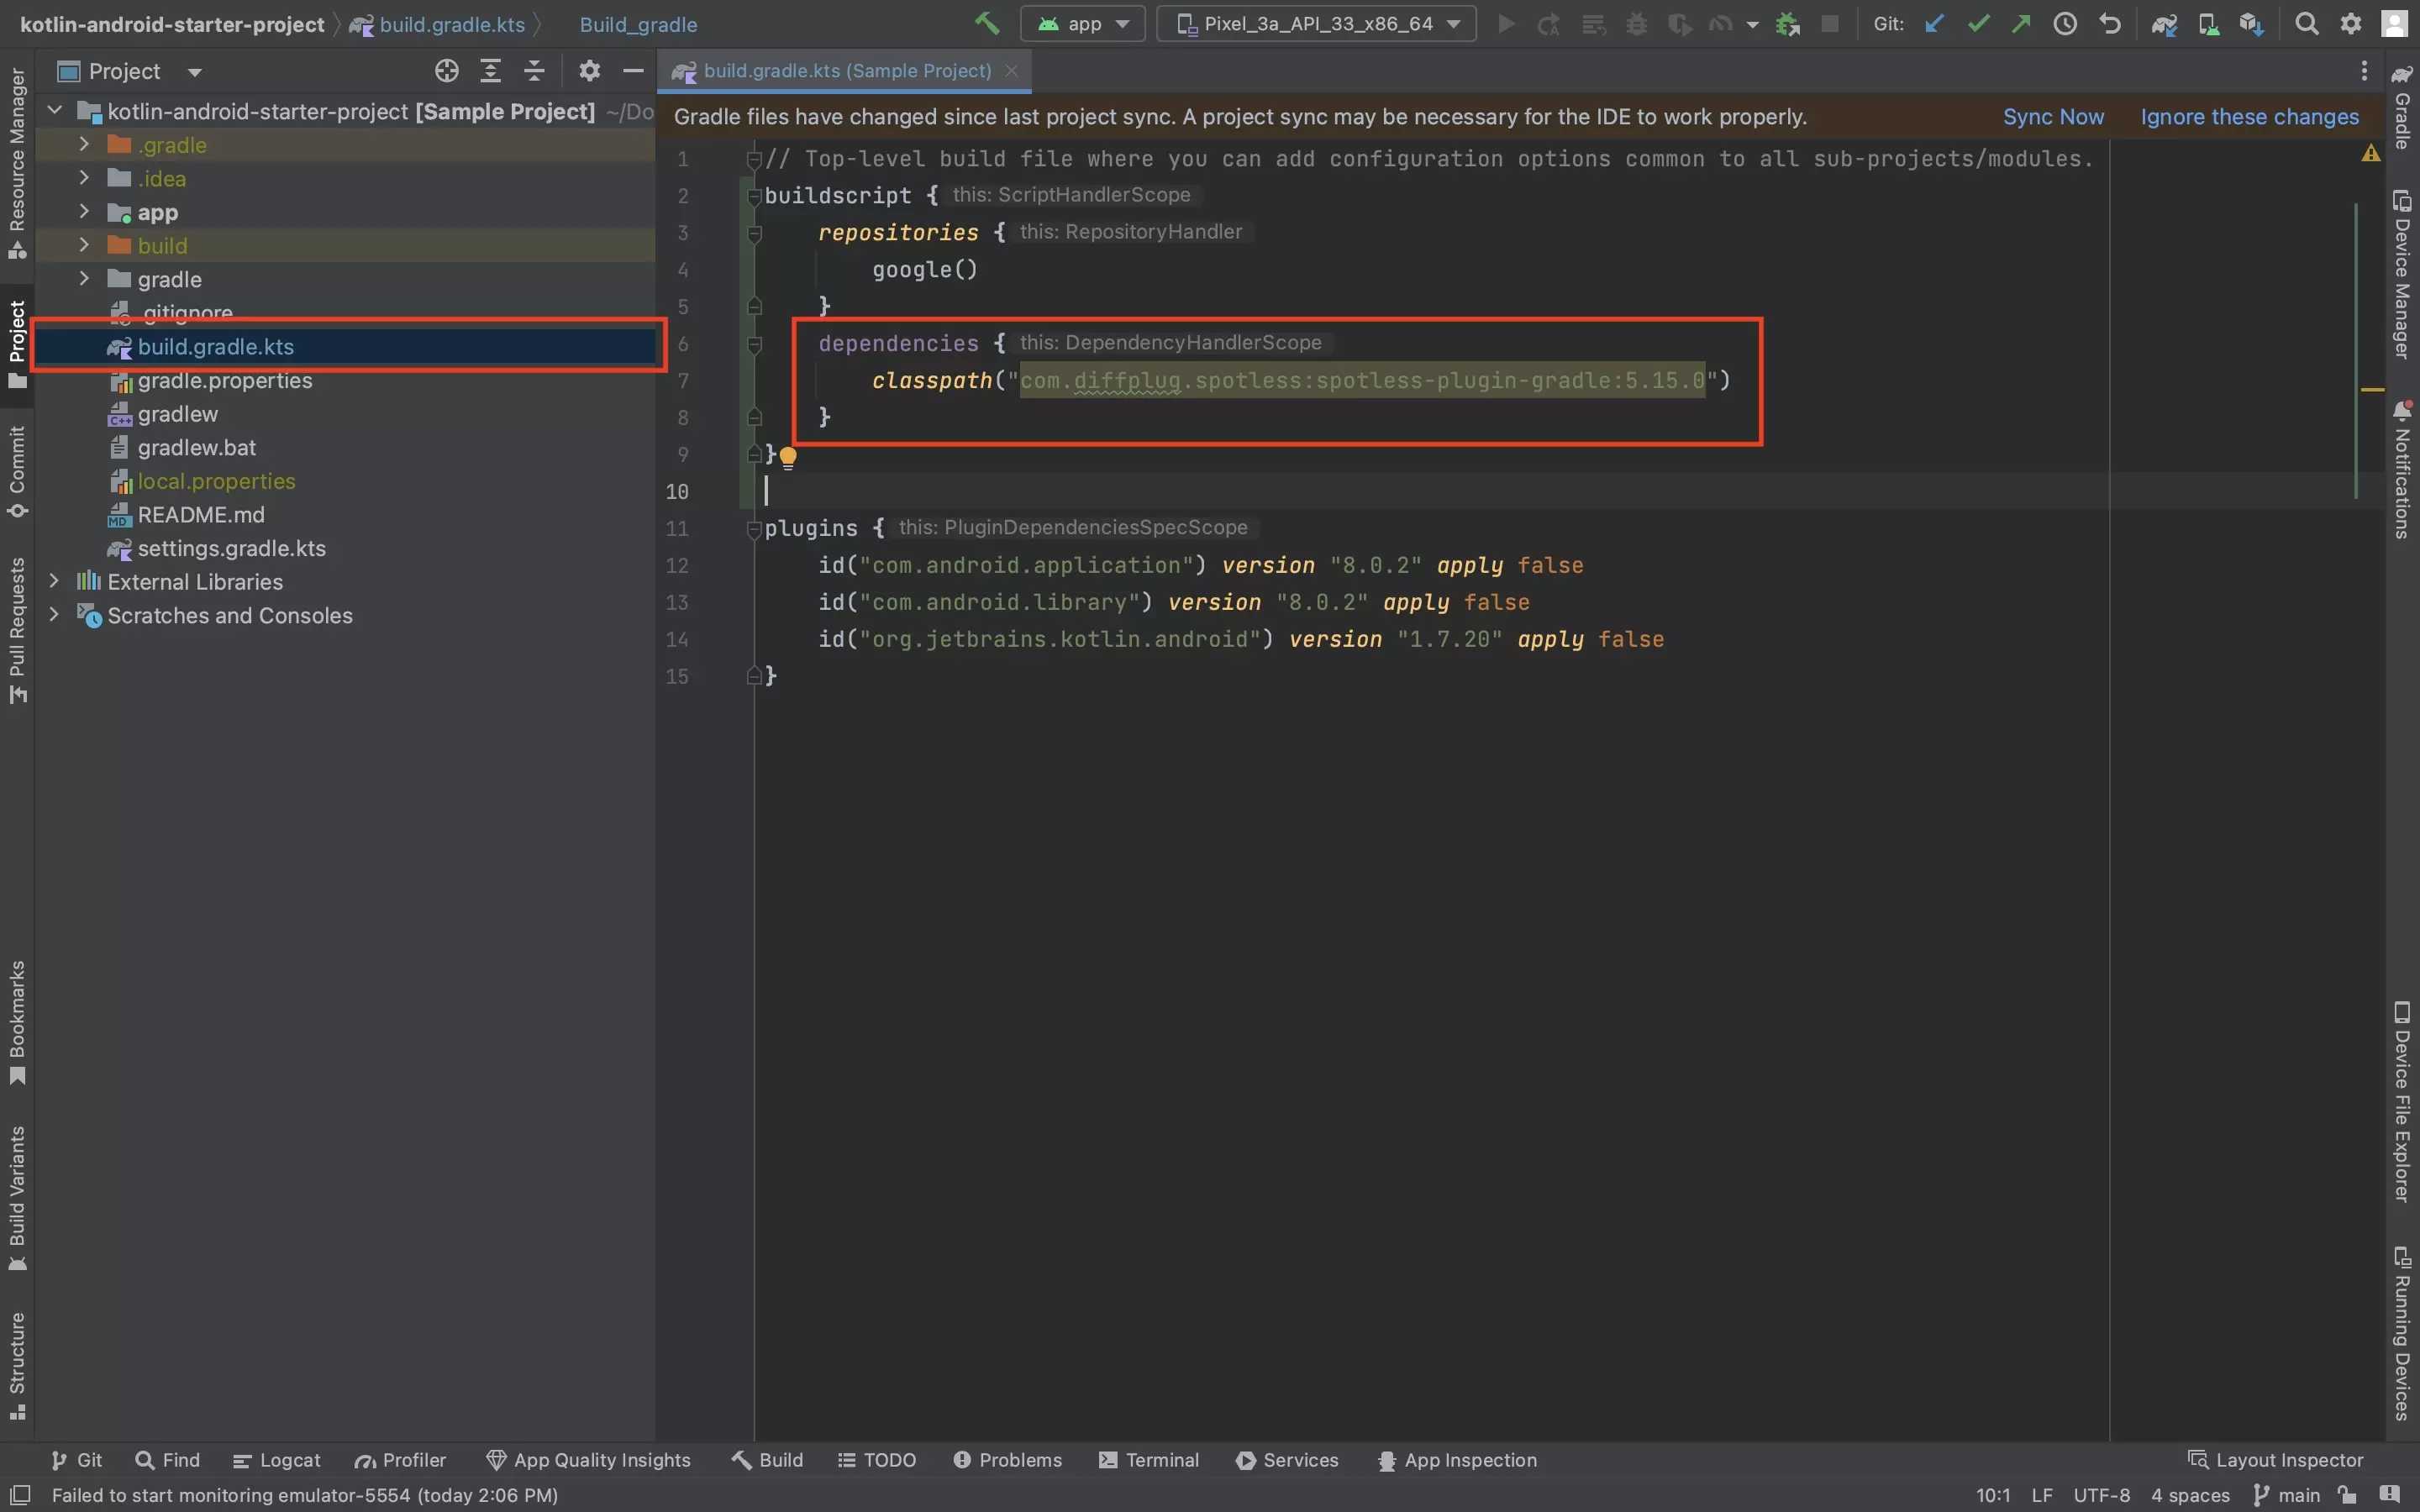 A screenshot of Android Studio showing the build.gradle.kts file. Highlighted is the location of the file and the dependency code which is added in this step.